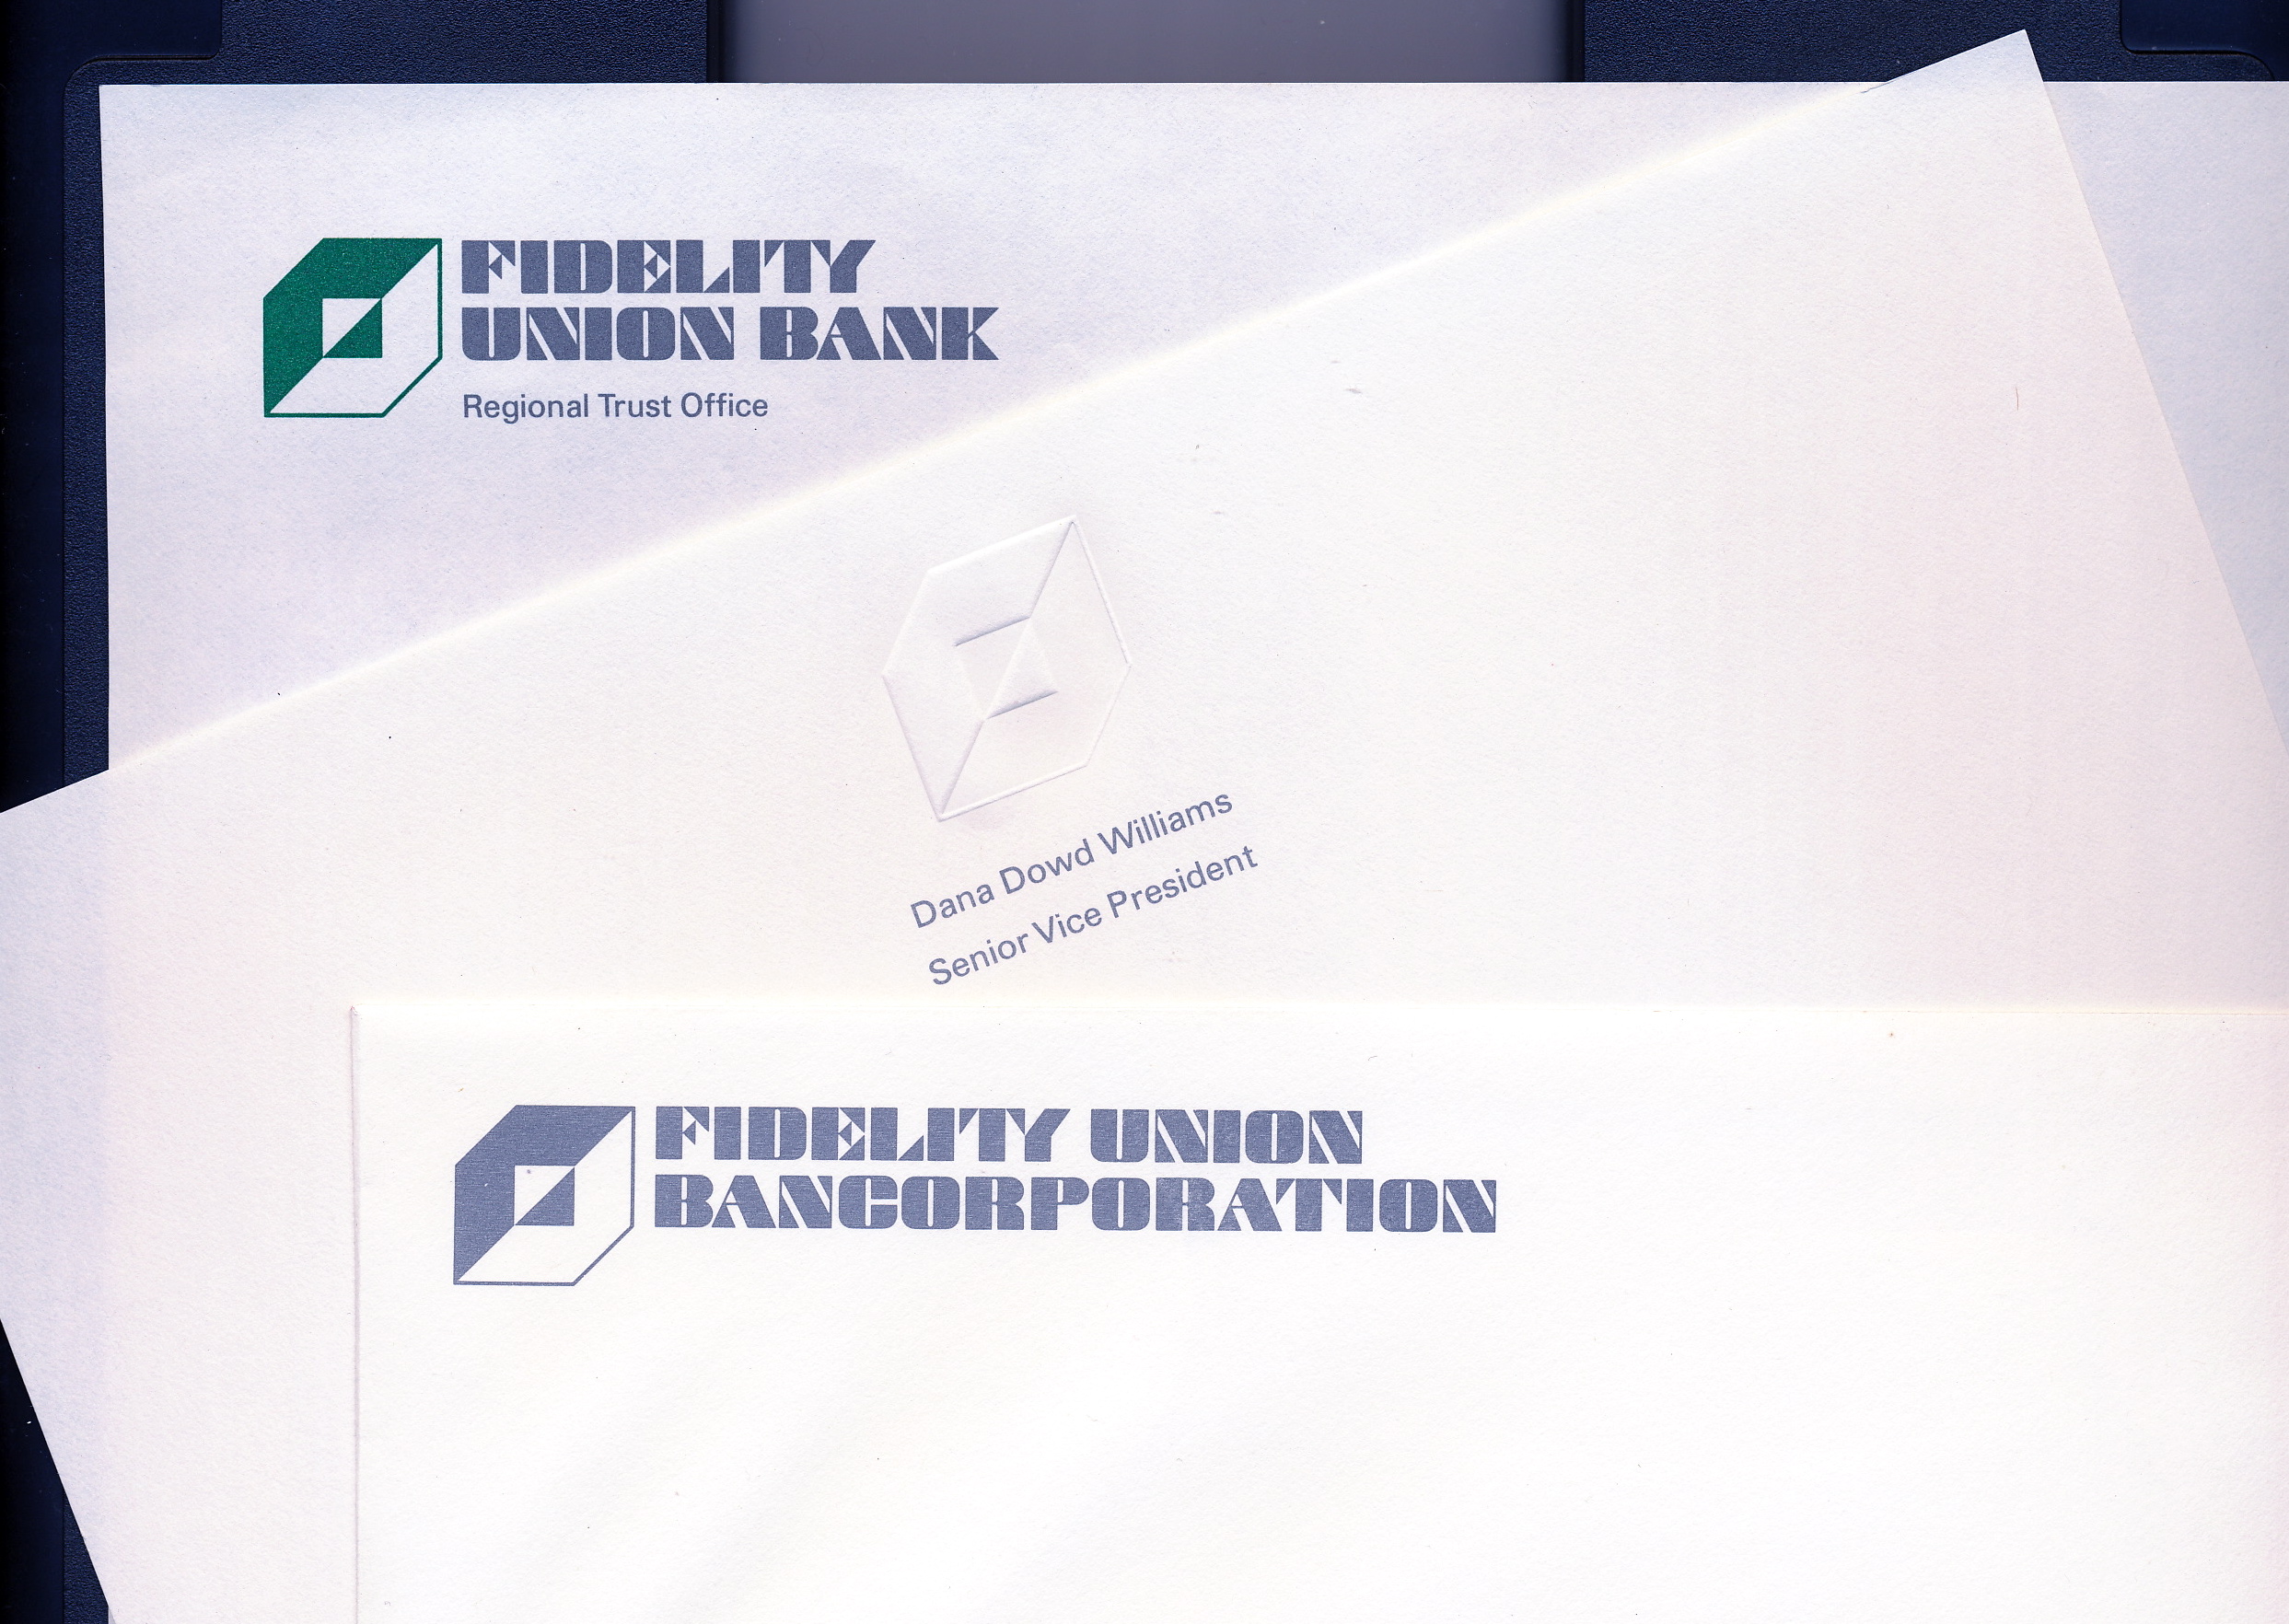 Logo and typface applications atop several pieces of paper.  Three different designs for the new letterhead.